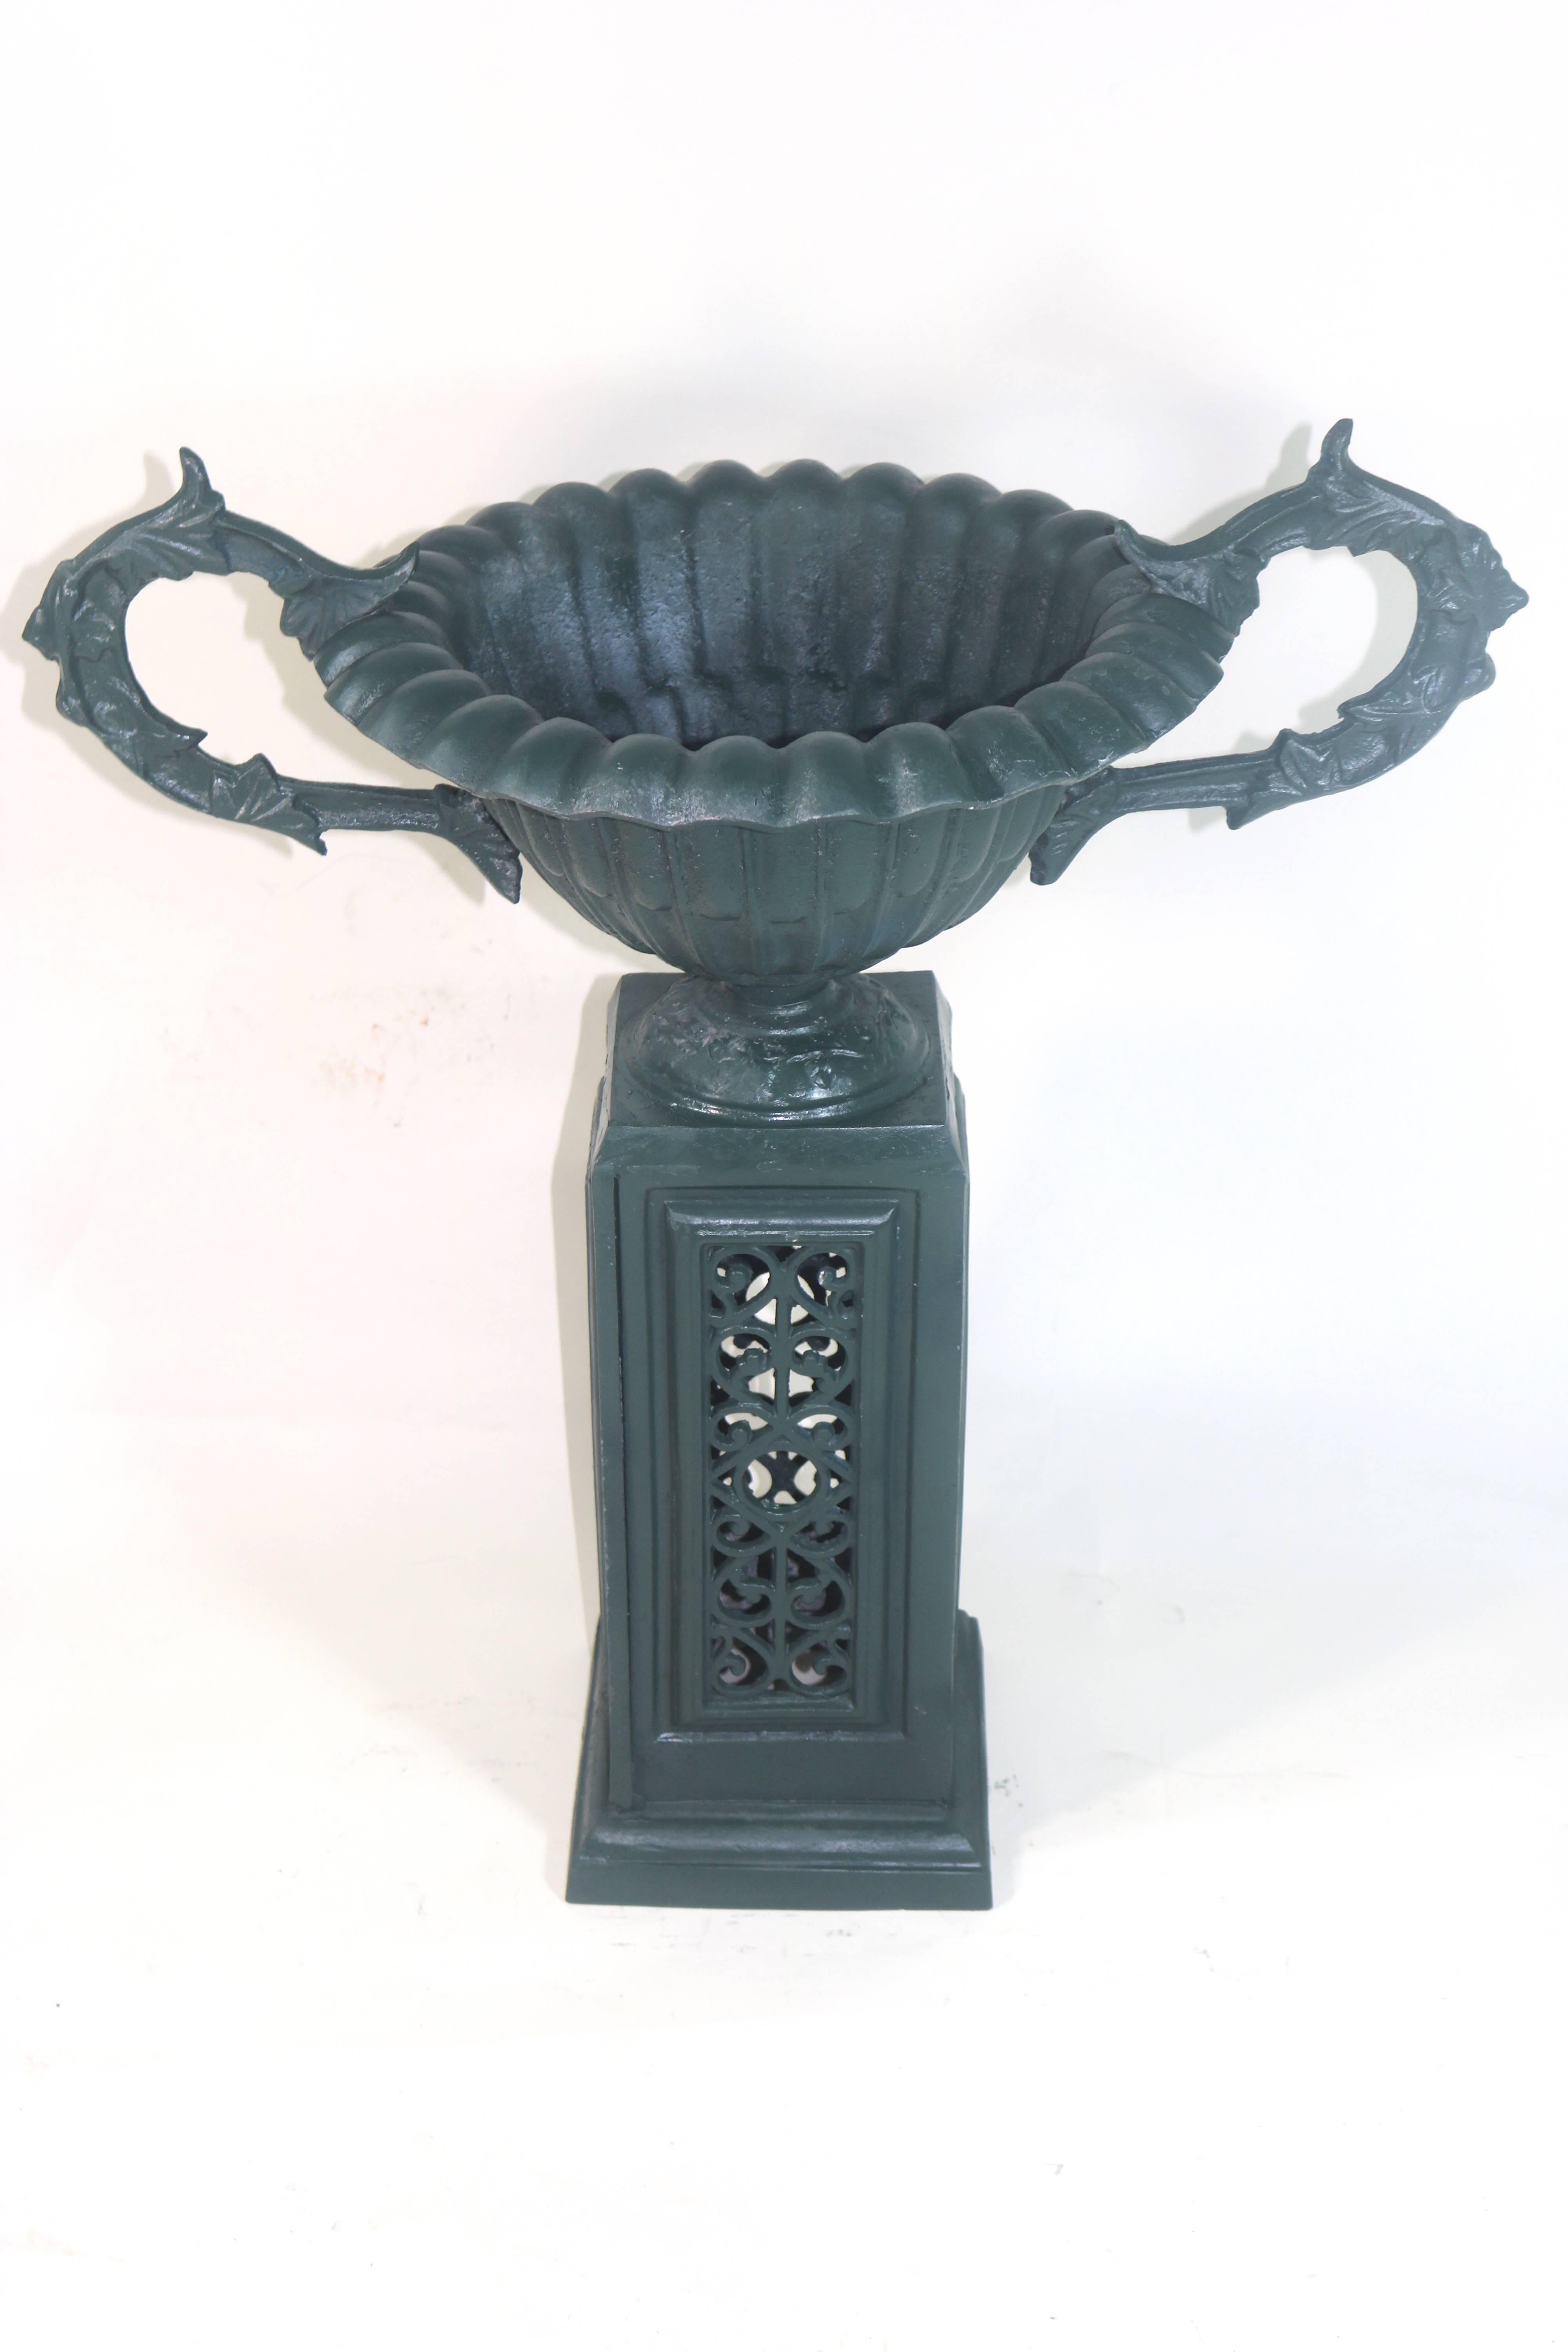 Elegant Victorian urn planter fabricated of finely cast metal. Attributed to J.W. Fiske and Company, the premier fabricator of cast metal urns, furniture, and statuary-several are in the historic White House Rose Garden.
A pair of large nicely